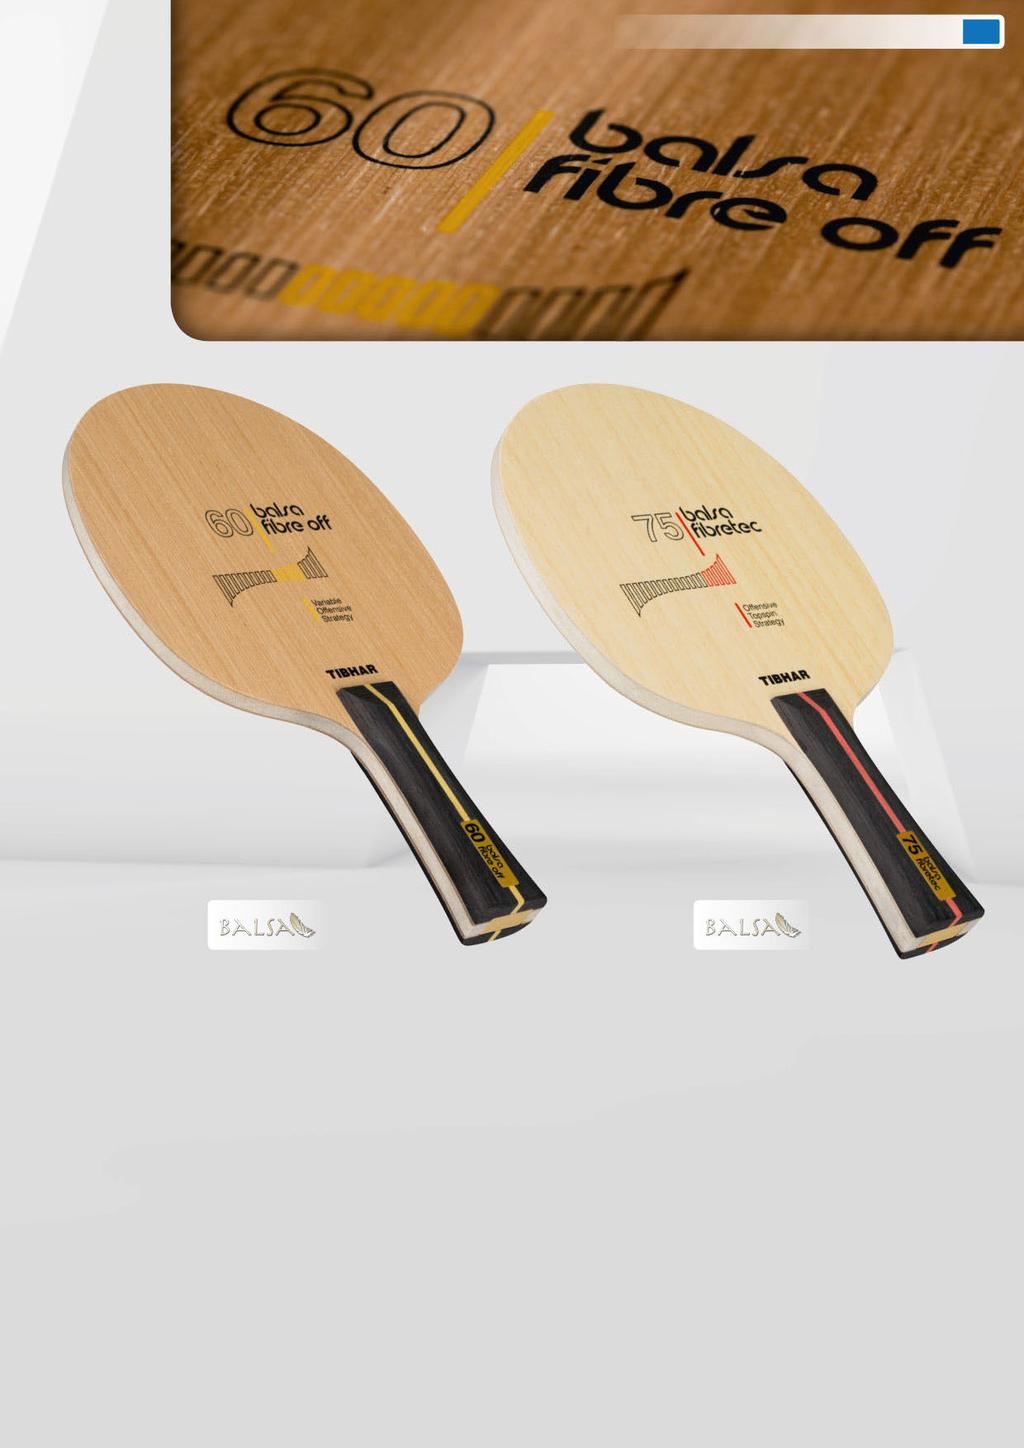 BALSA 29 BALSA FIBRE OFF 60 The Balsa Fibre OFF 60 is designed for players who like to play an offensive game but at the same time want to place very precise shots.